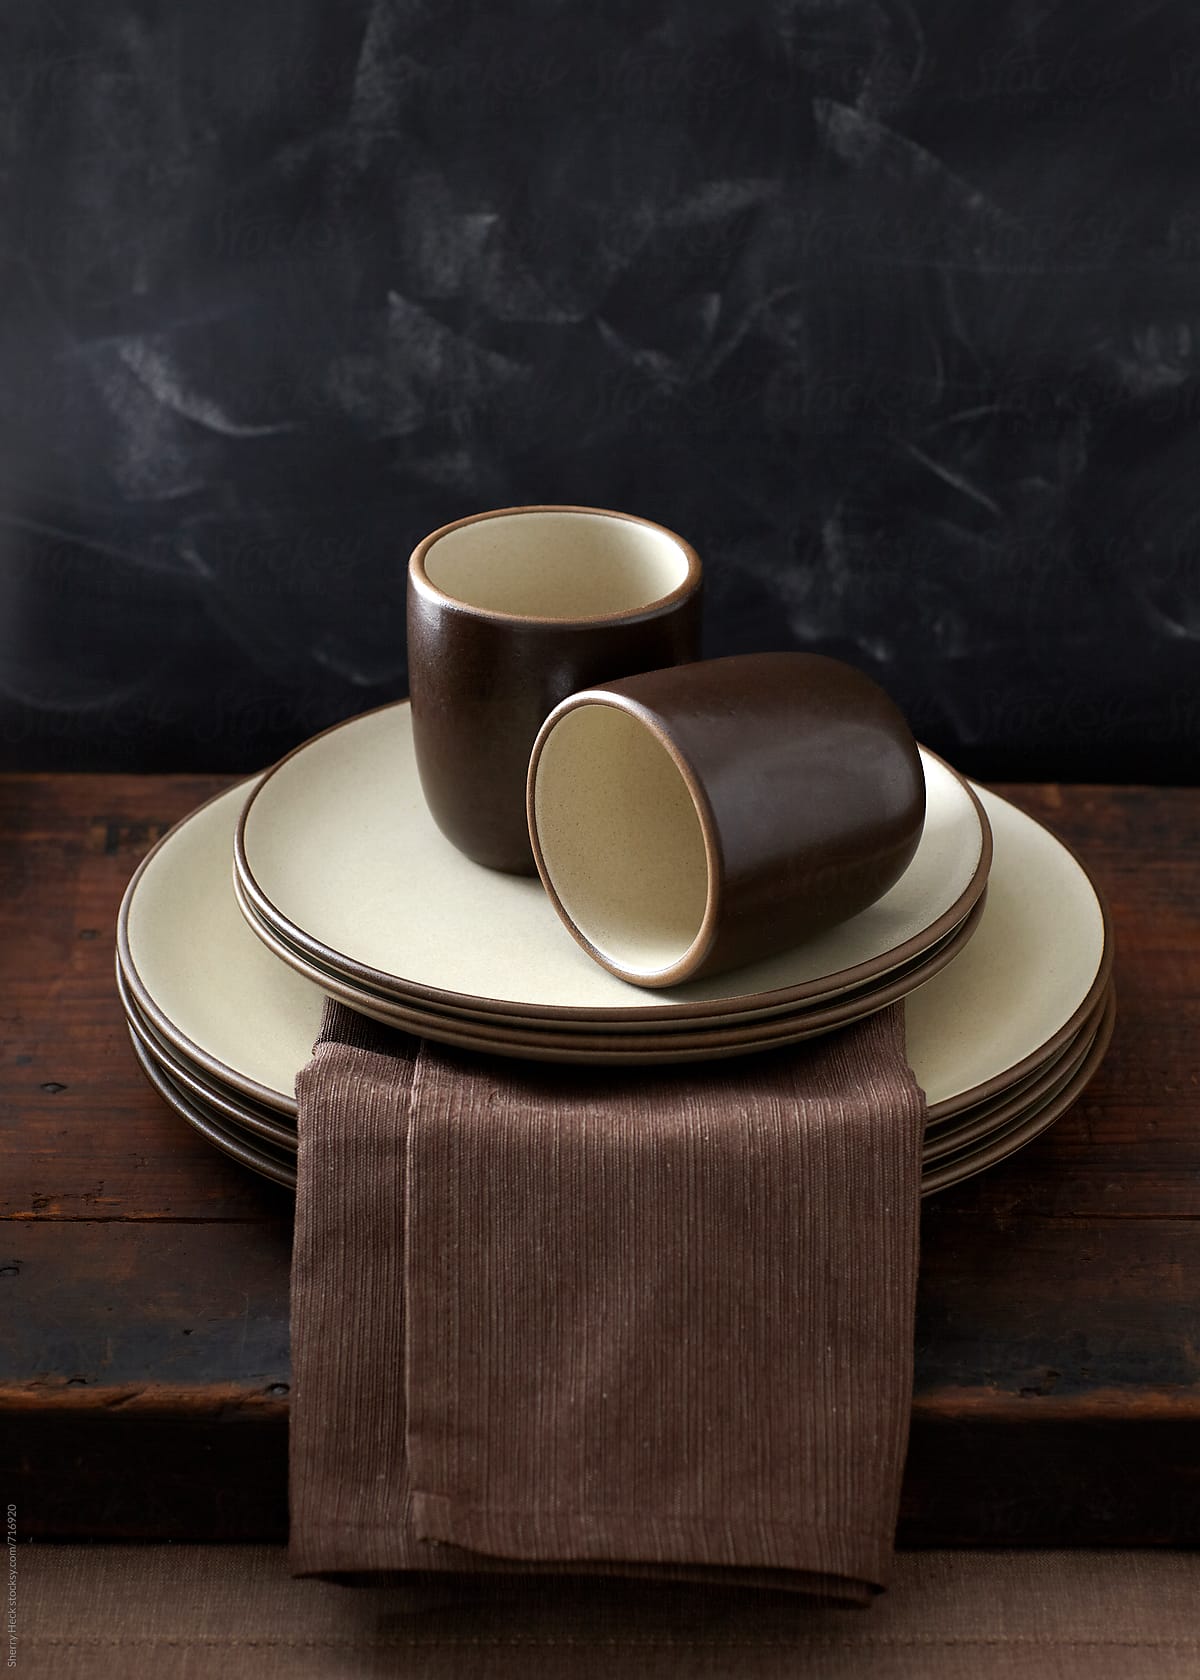 Heathware ceramic plates and cups stacked on wood surface